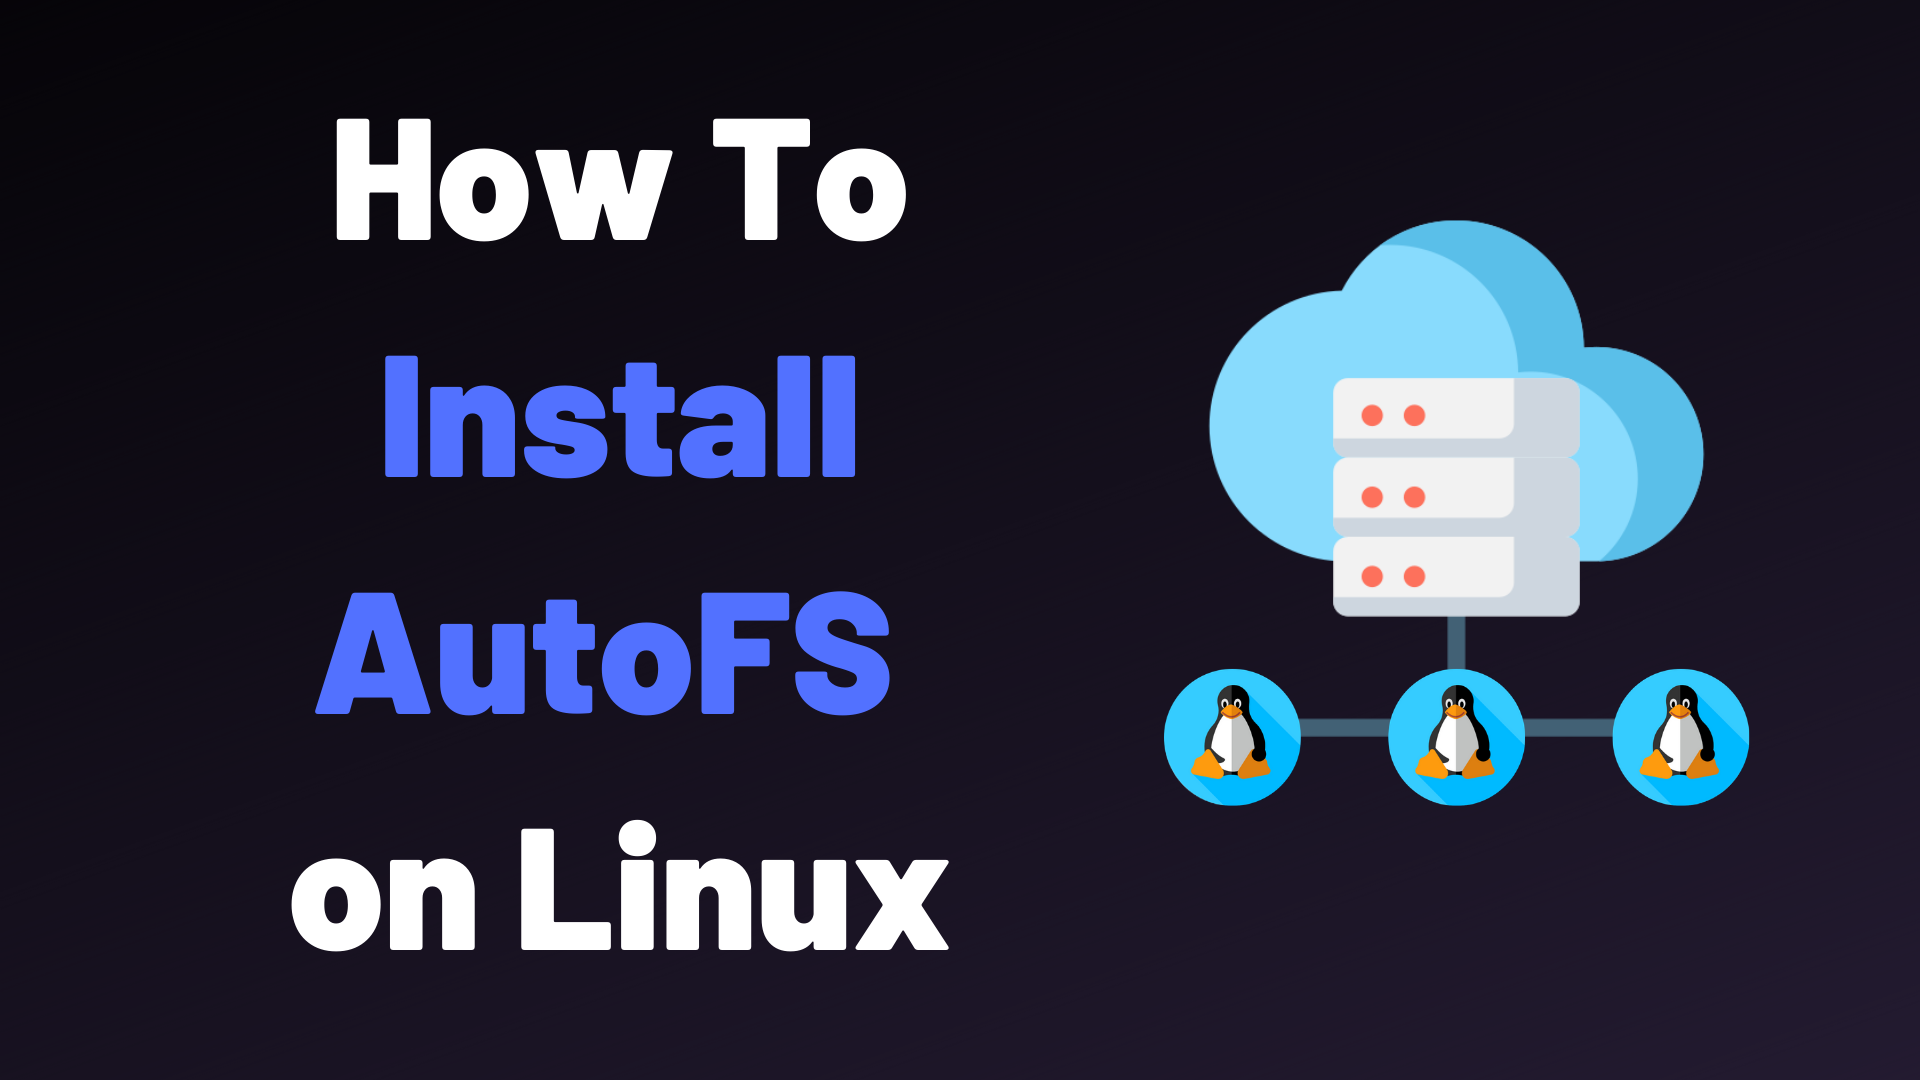 How To Install AutoFS on Linux